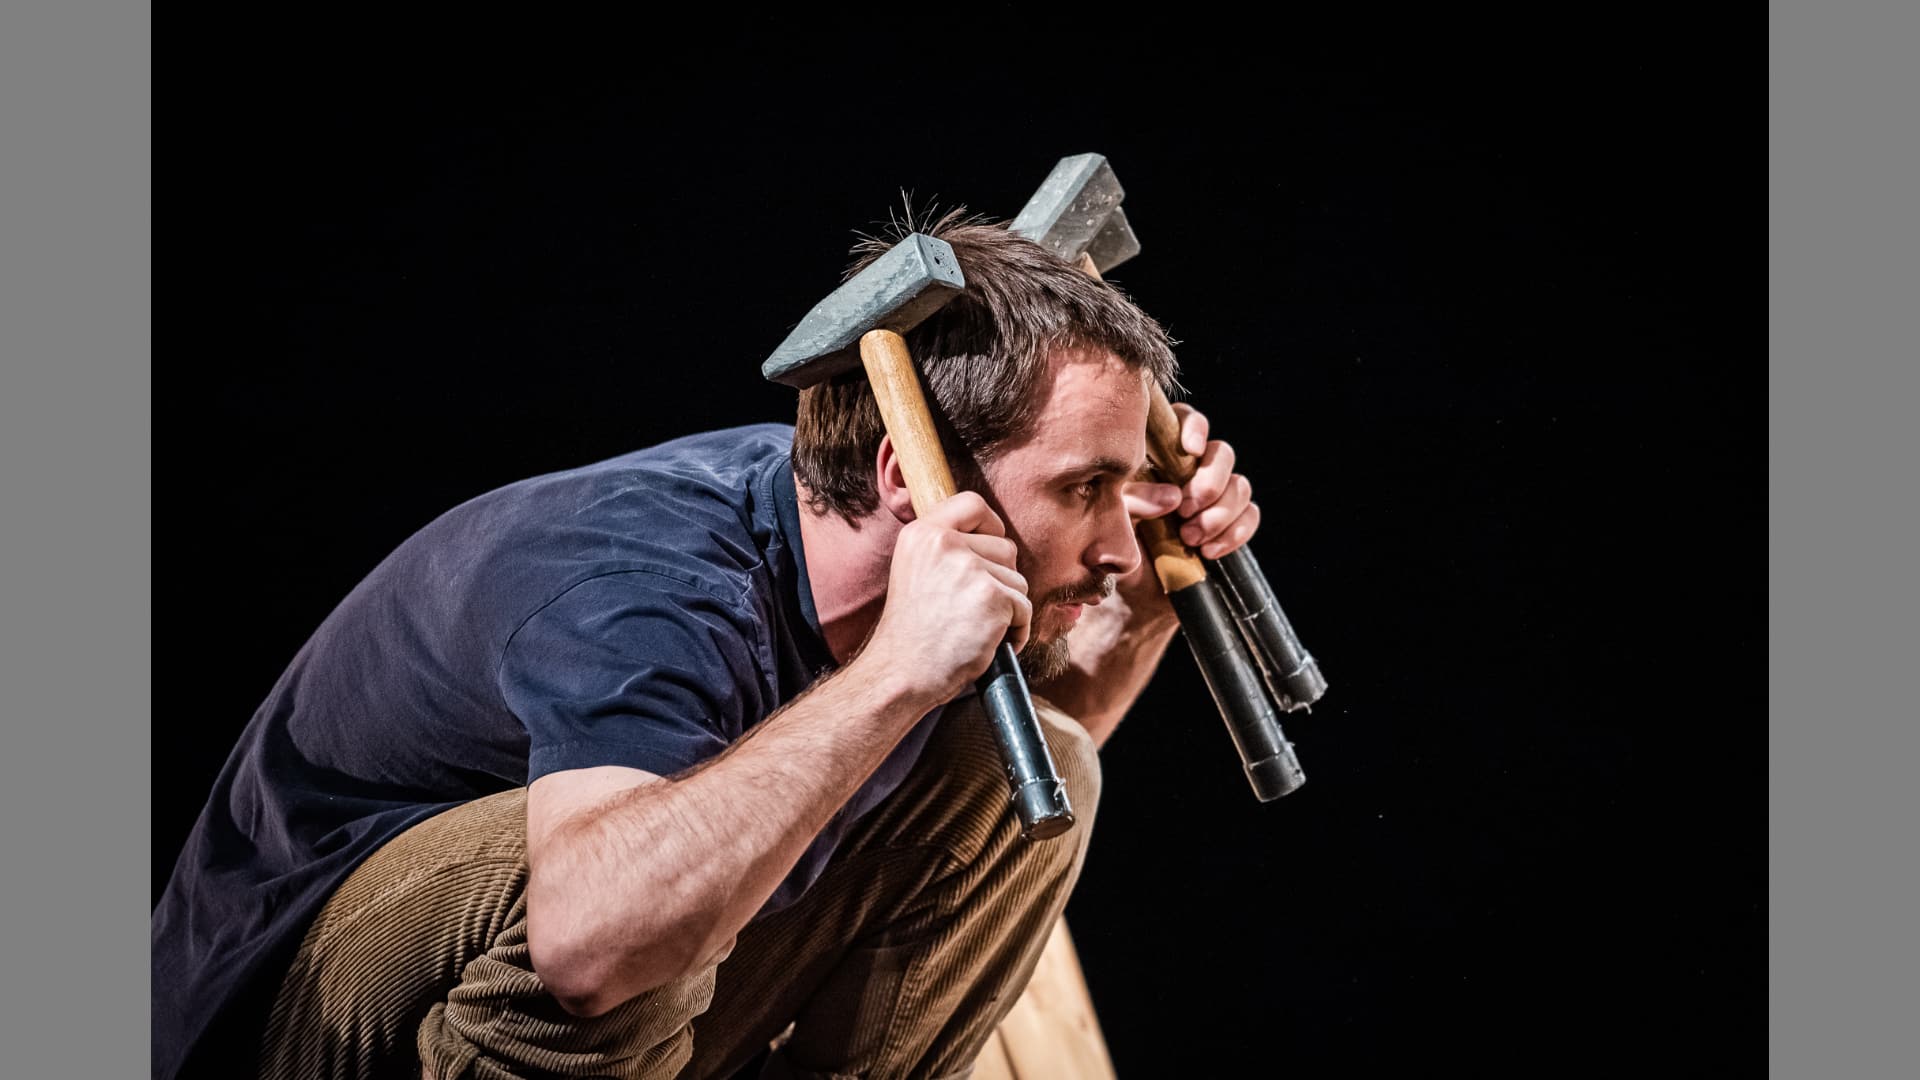 A performer crouches and holds up hammers to cover his ears